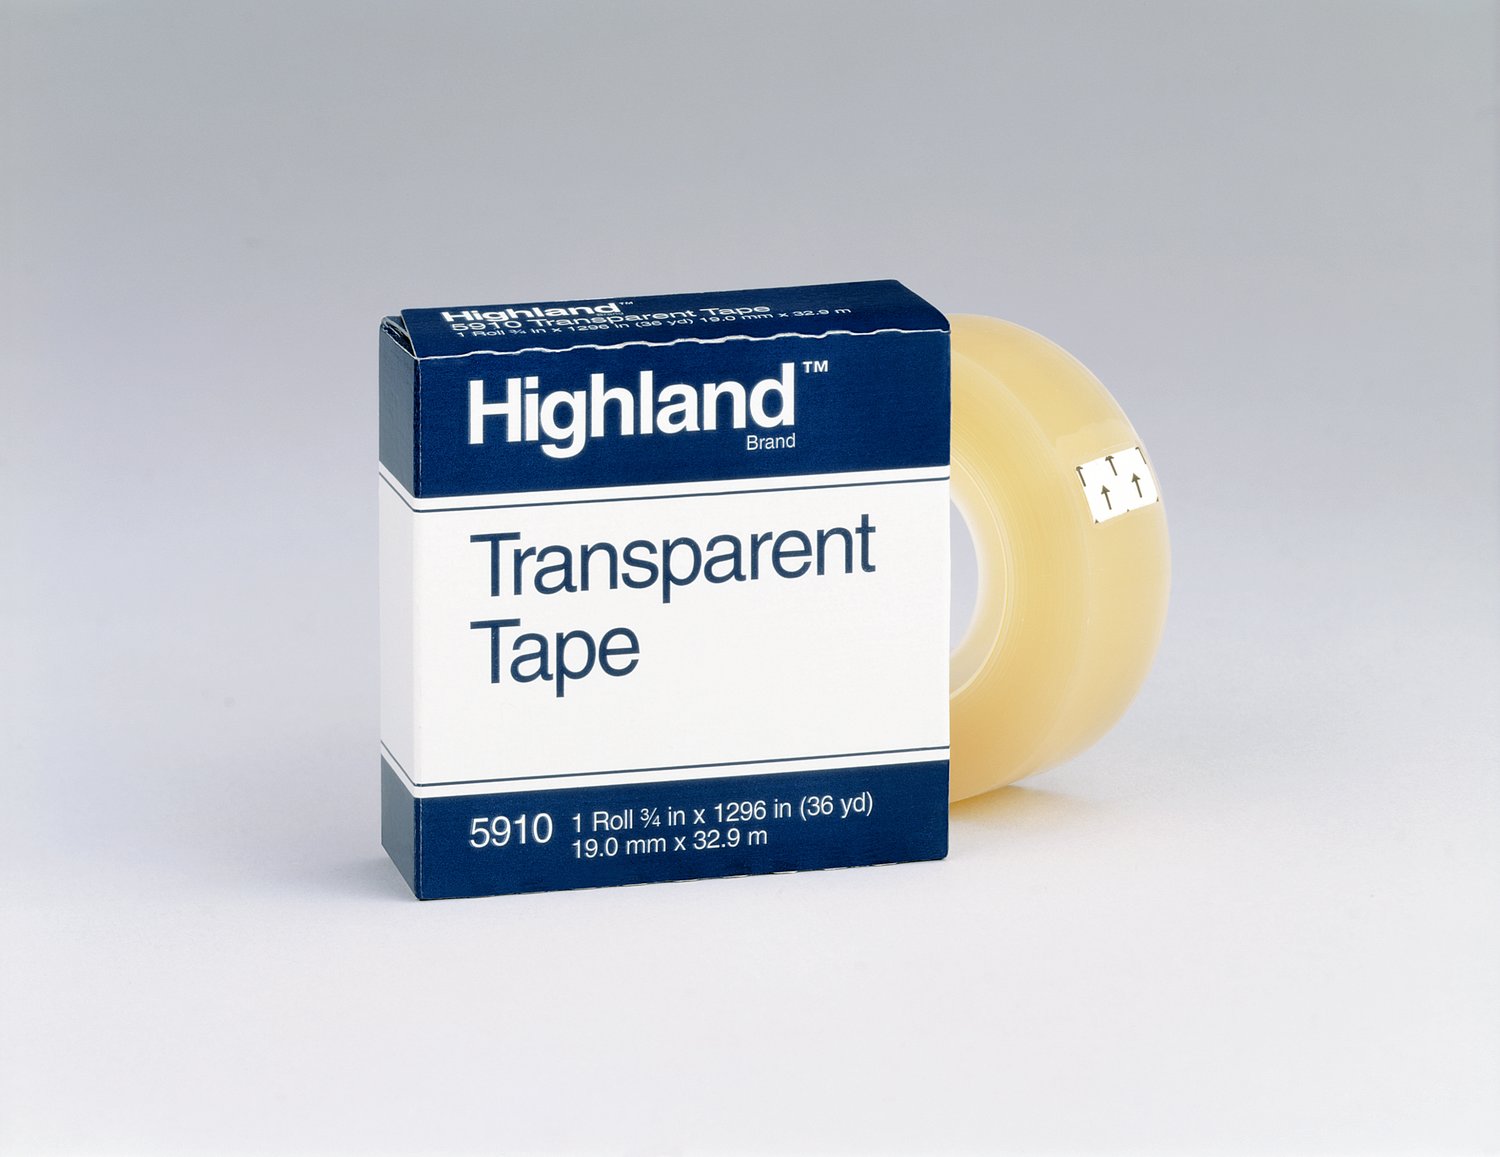 7010338350 - Highland Transparent Tape 5910, 3/4 in x 1296 in Boxed